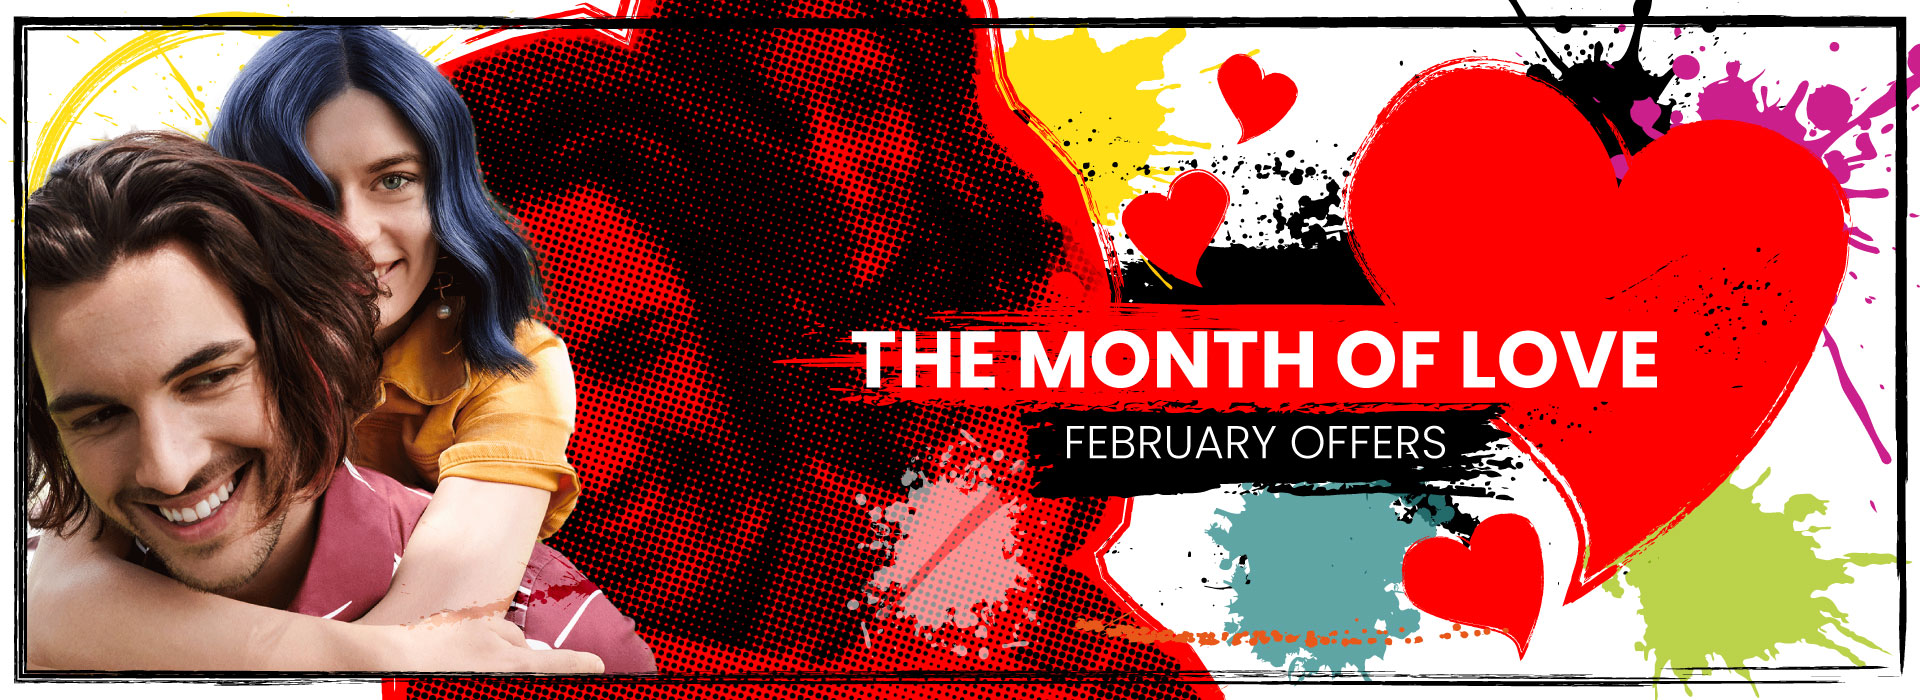 THE MONTH OF LOVE BANNER